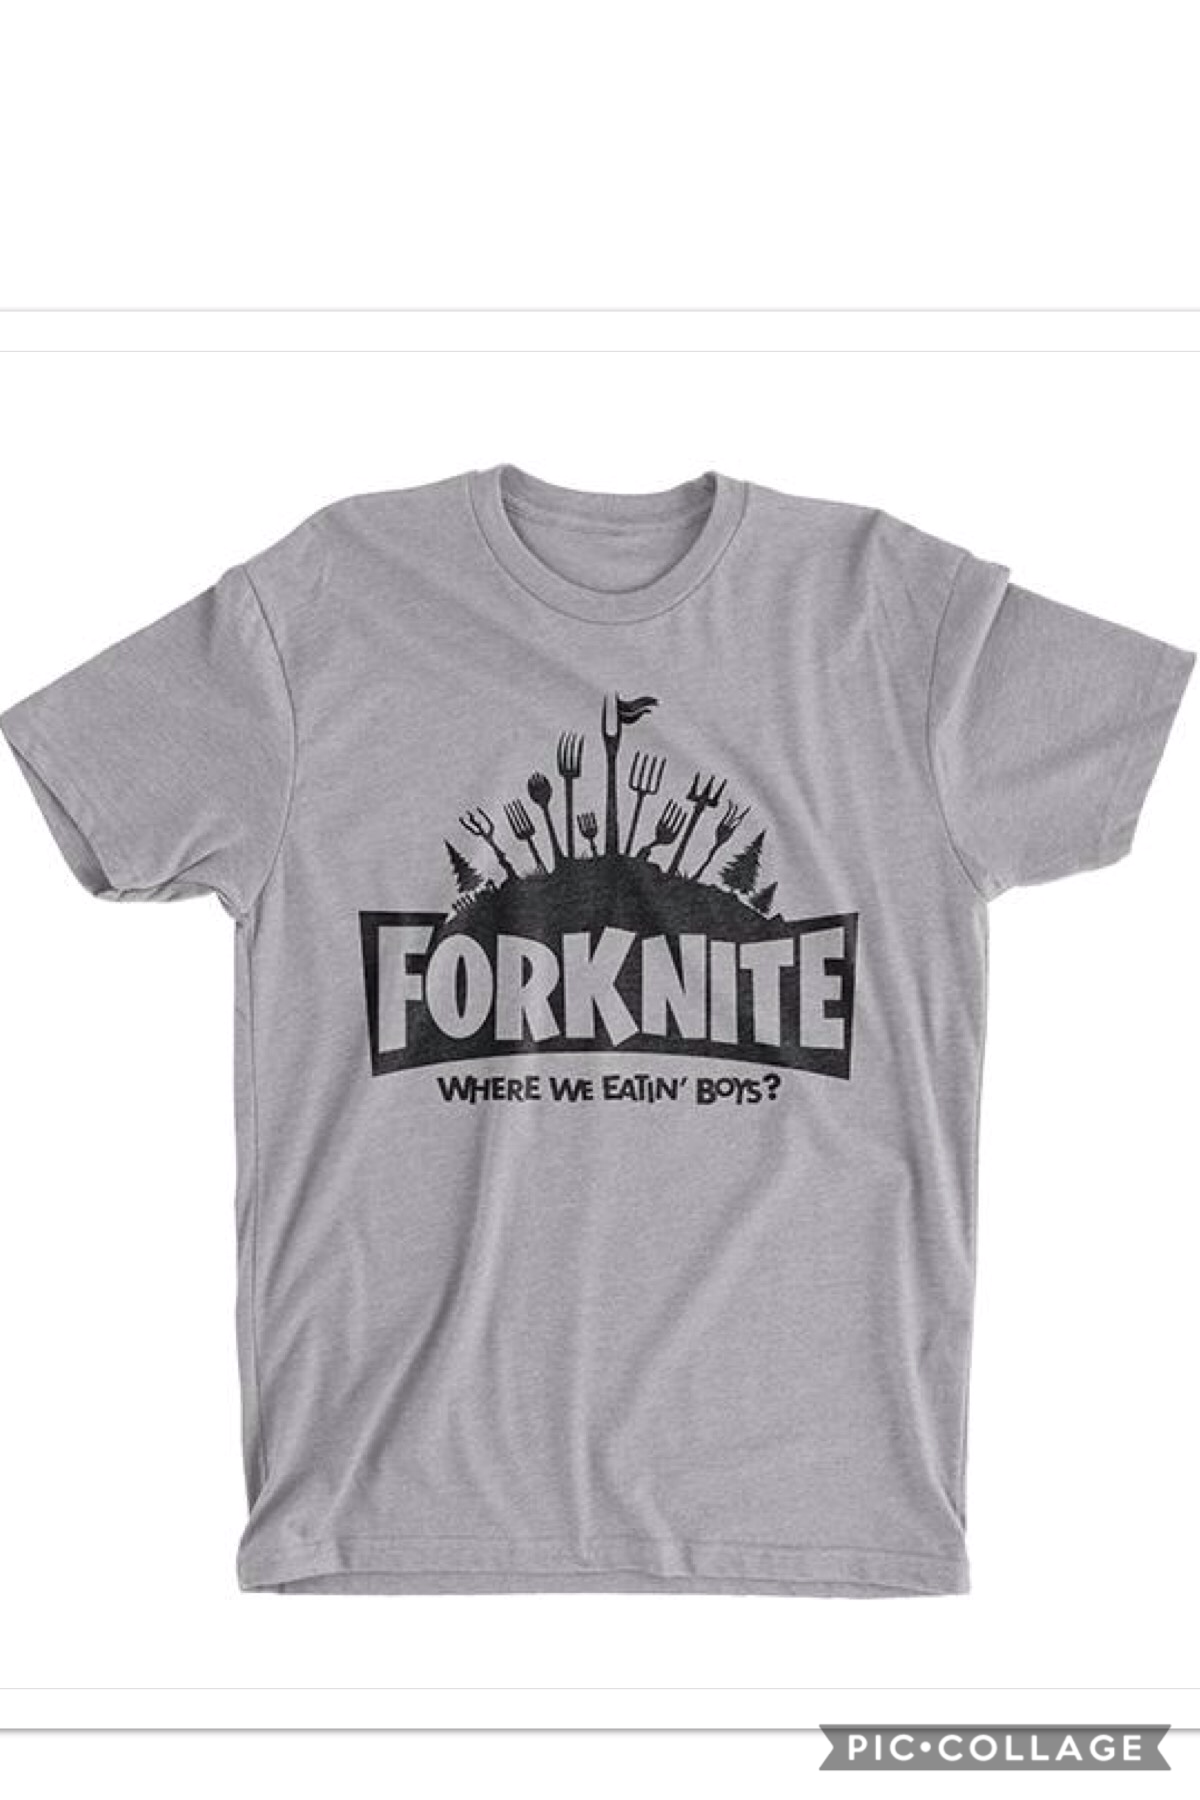 THIS IS THE NEW SHIRT IM GETTING 🤣